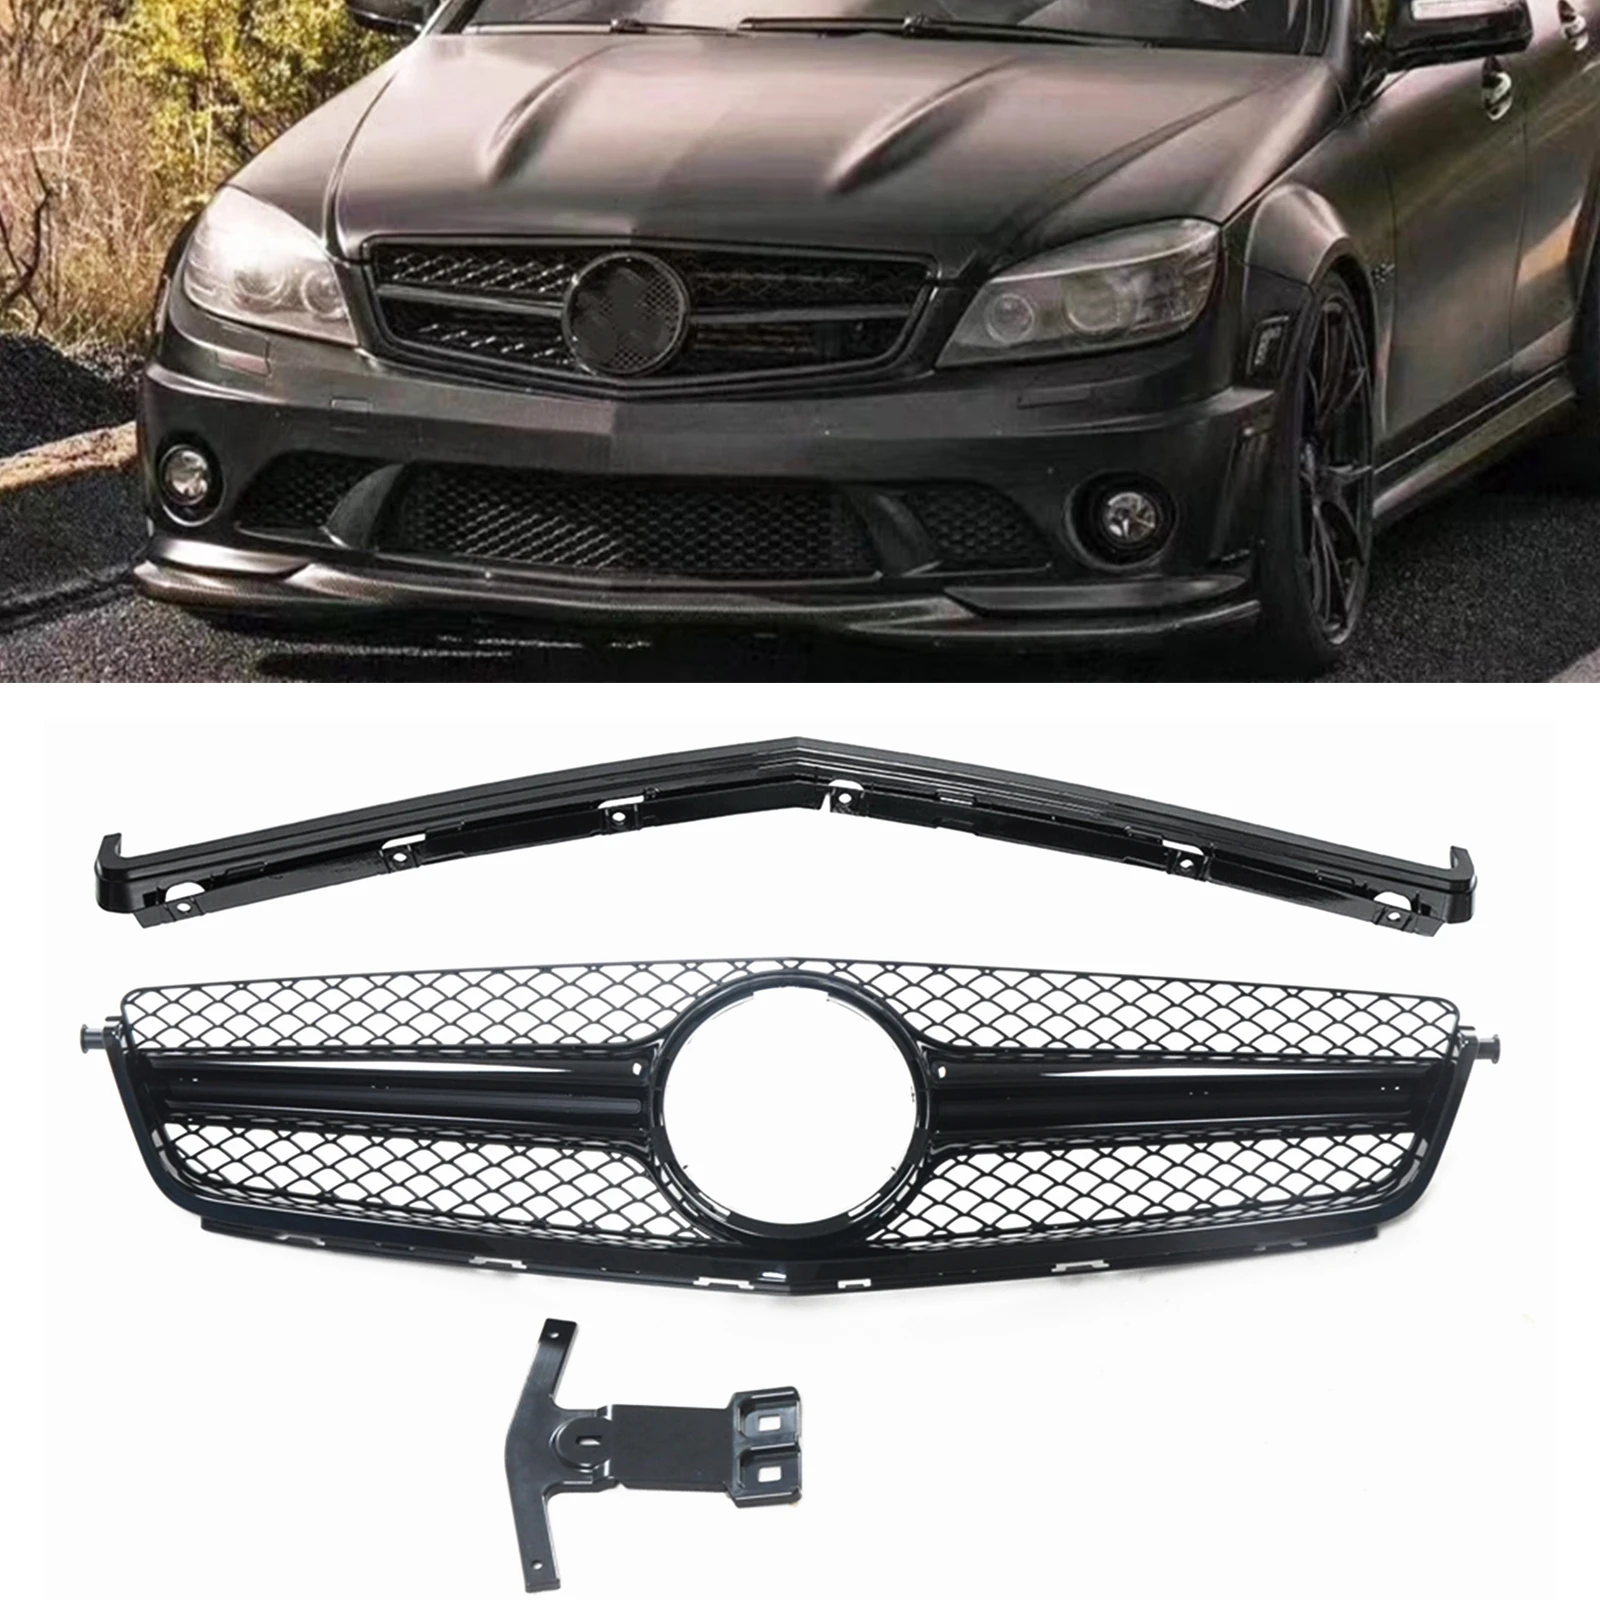 Racing Grills Front Grille For Mercedes-Benz 2008-2011 W204 C-Class C63 AMG Only Black Car Upper Bumper Hood Mesh Body Kit Grid